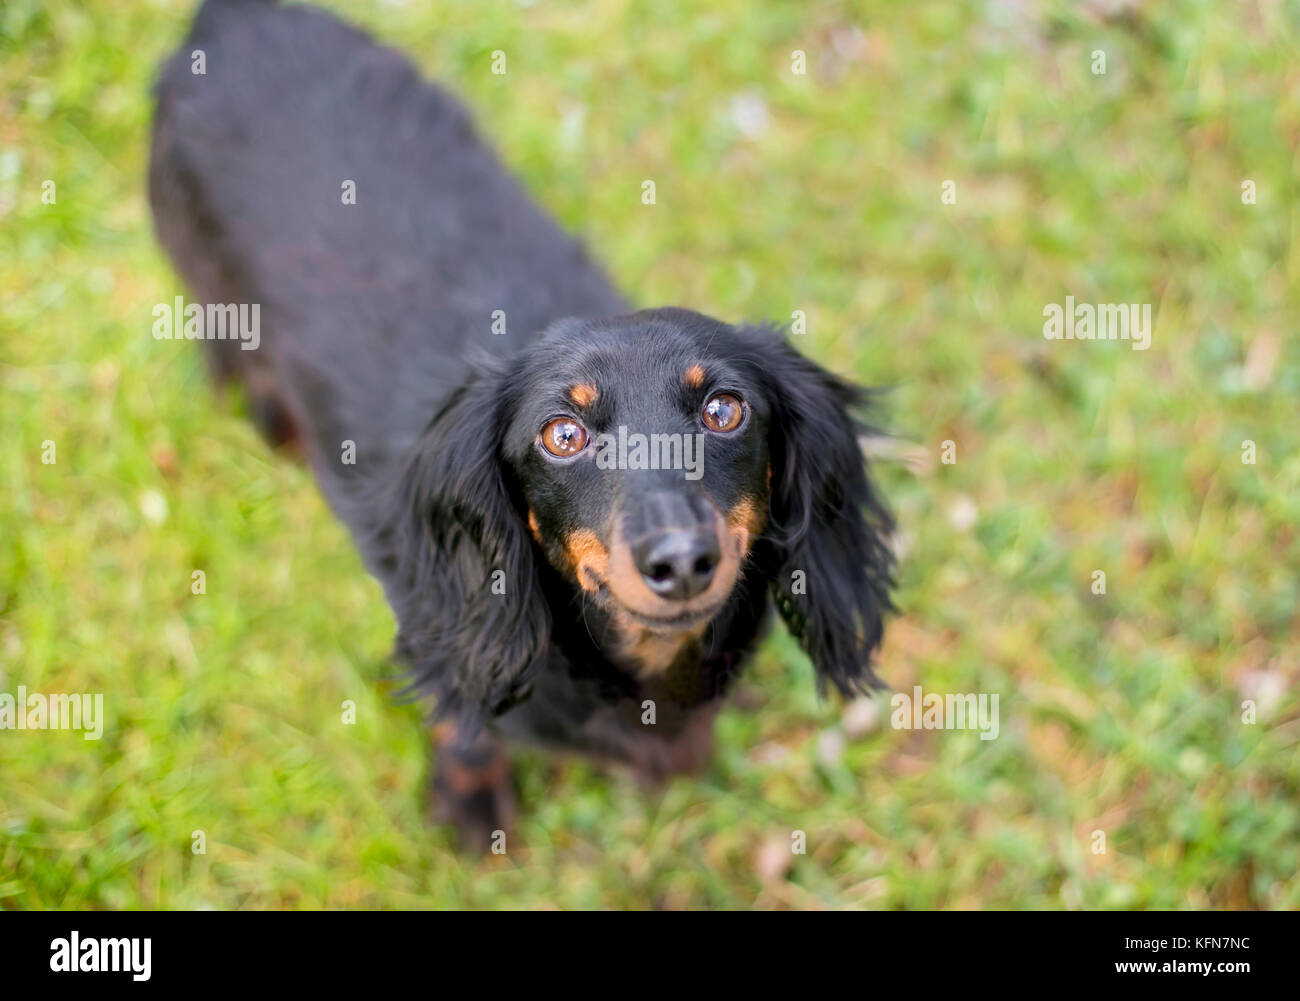 A black and red Long-haired Dachshund dog looking up Stock Photo - Alamy